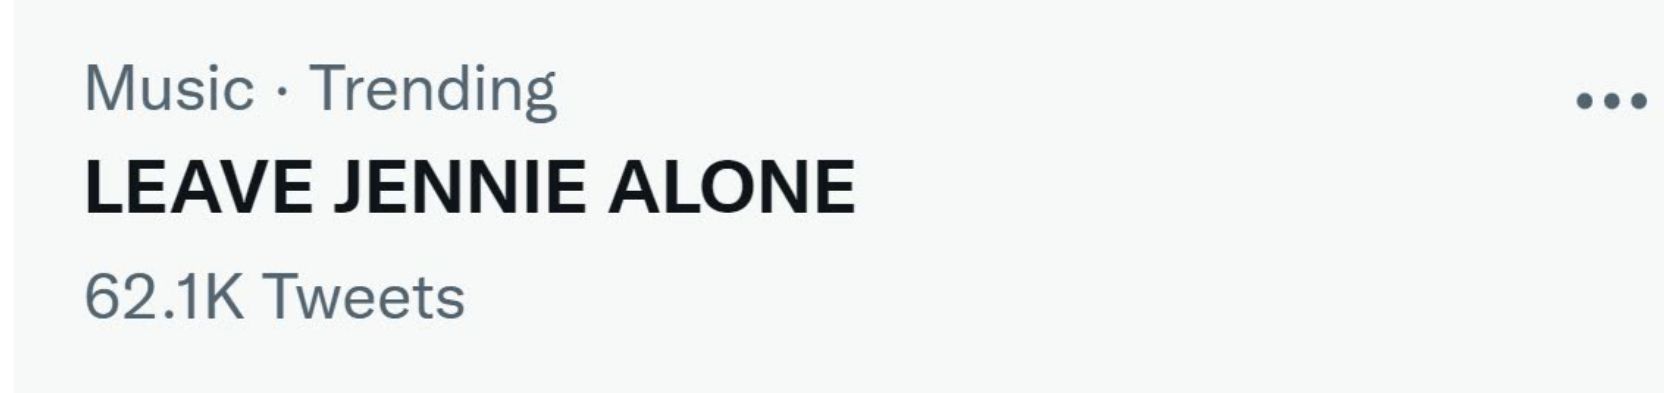  “LEAVE JENNIE ALONE” has been trending on Twitter